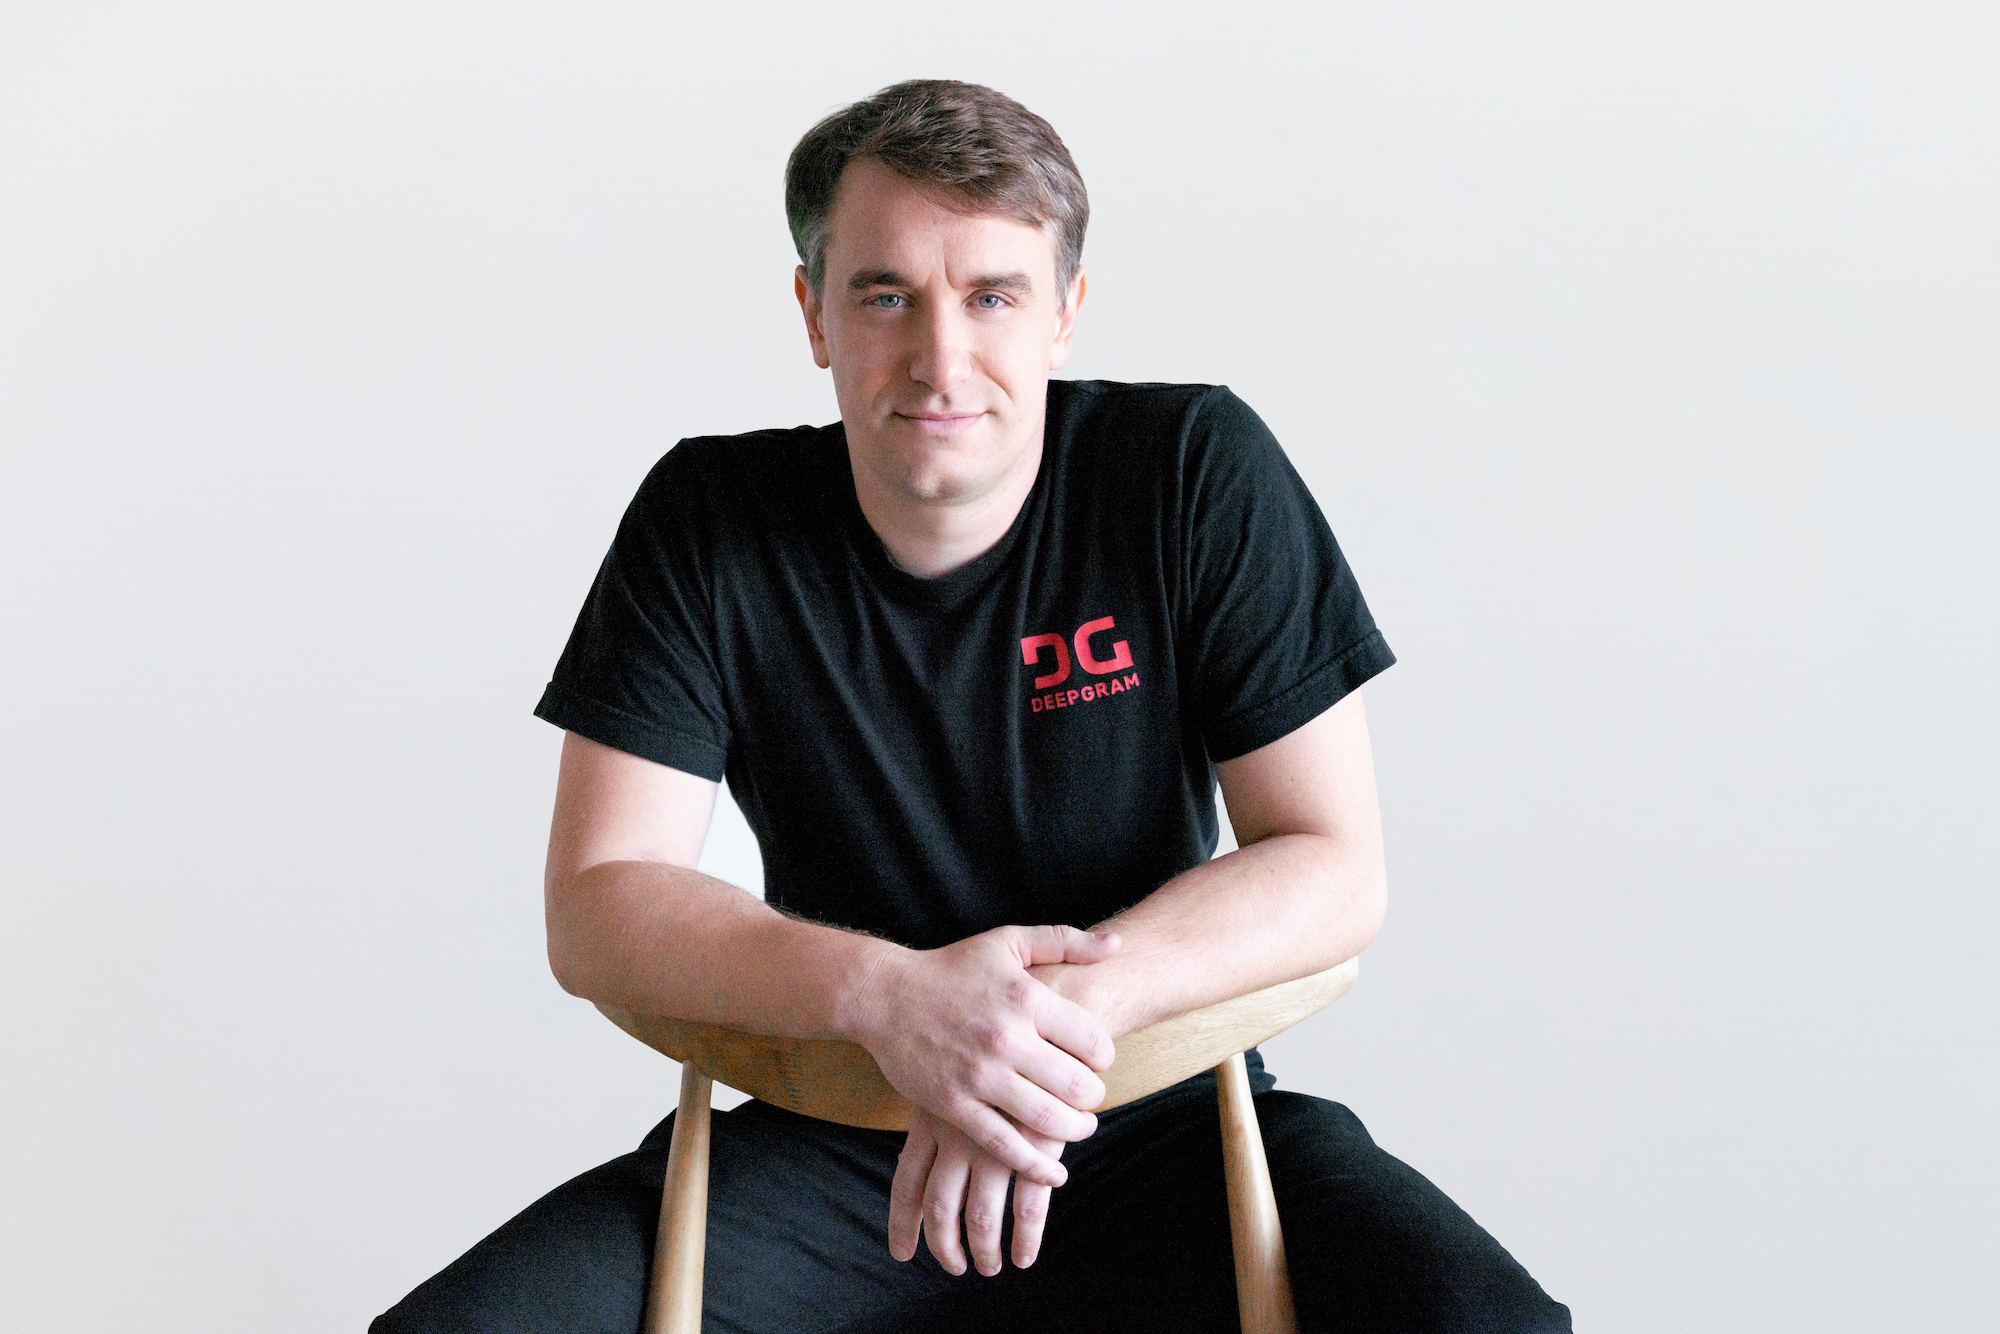 Deepgram's co-founder and CEO CEO Scott Stephenson poses for a photo